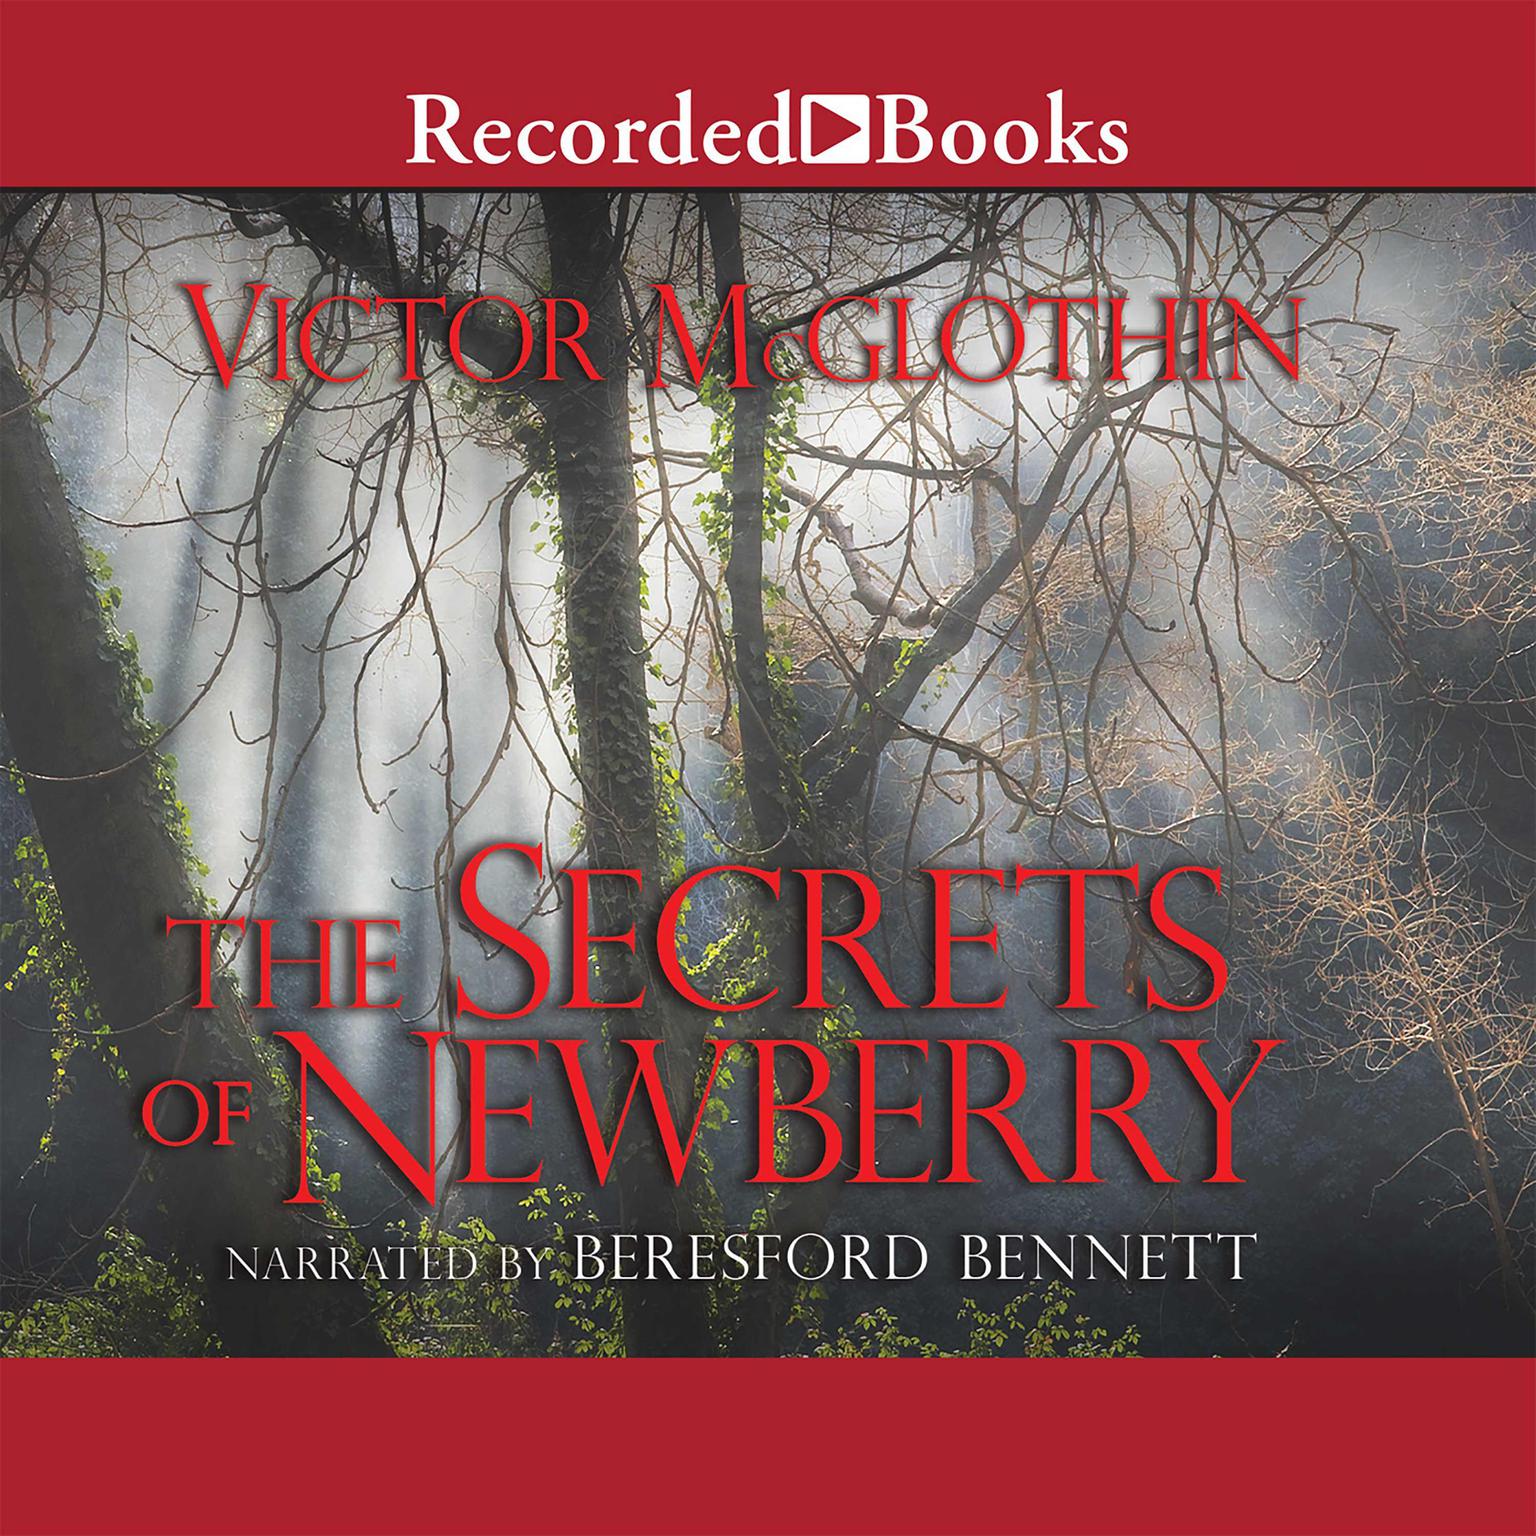 The Secrets of Newberry Audiobook, by Victor McGlothin